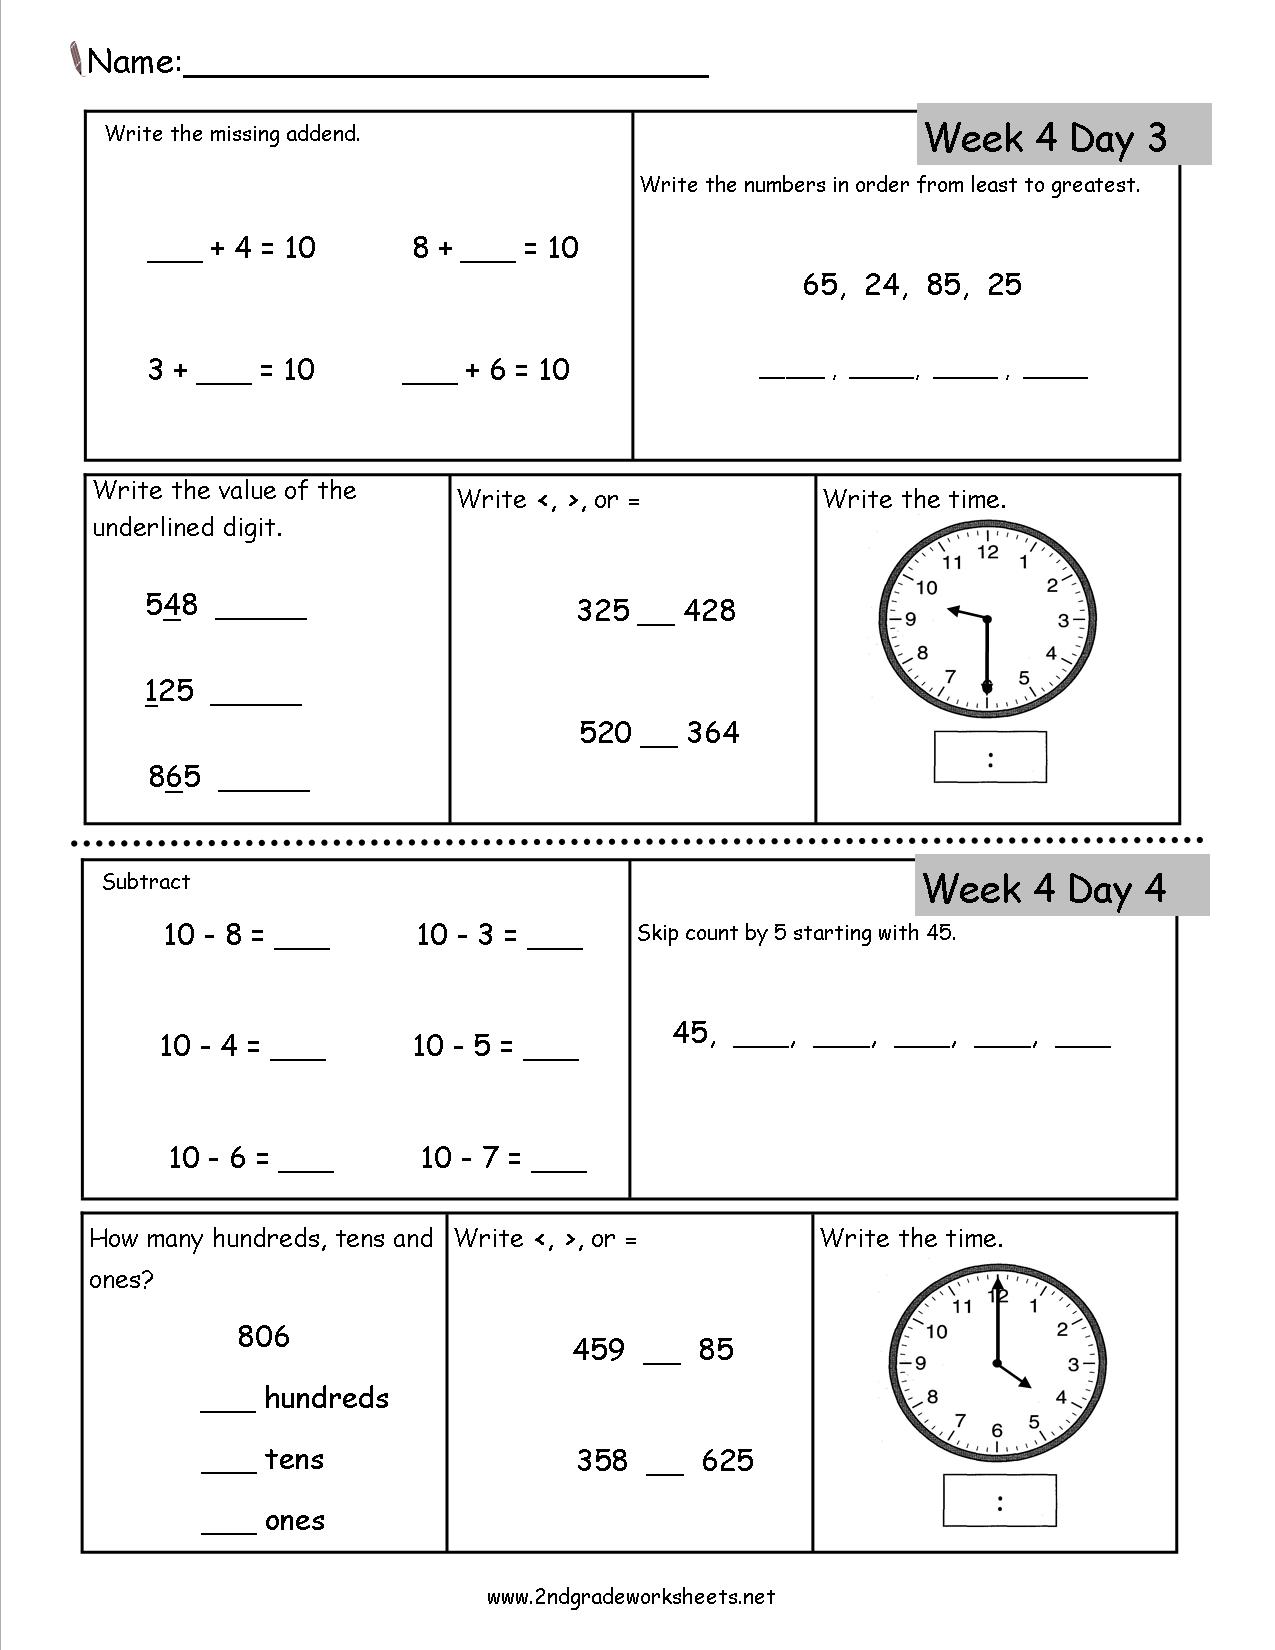 13 Best Images of Printable Music Worksheets - Free ...